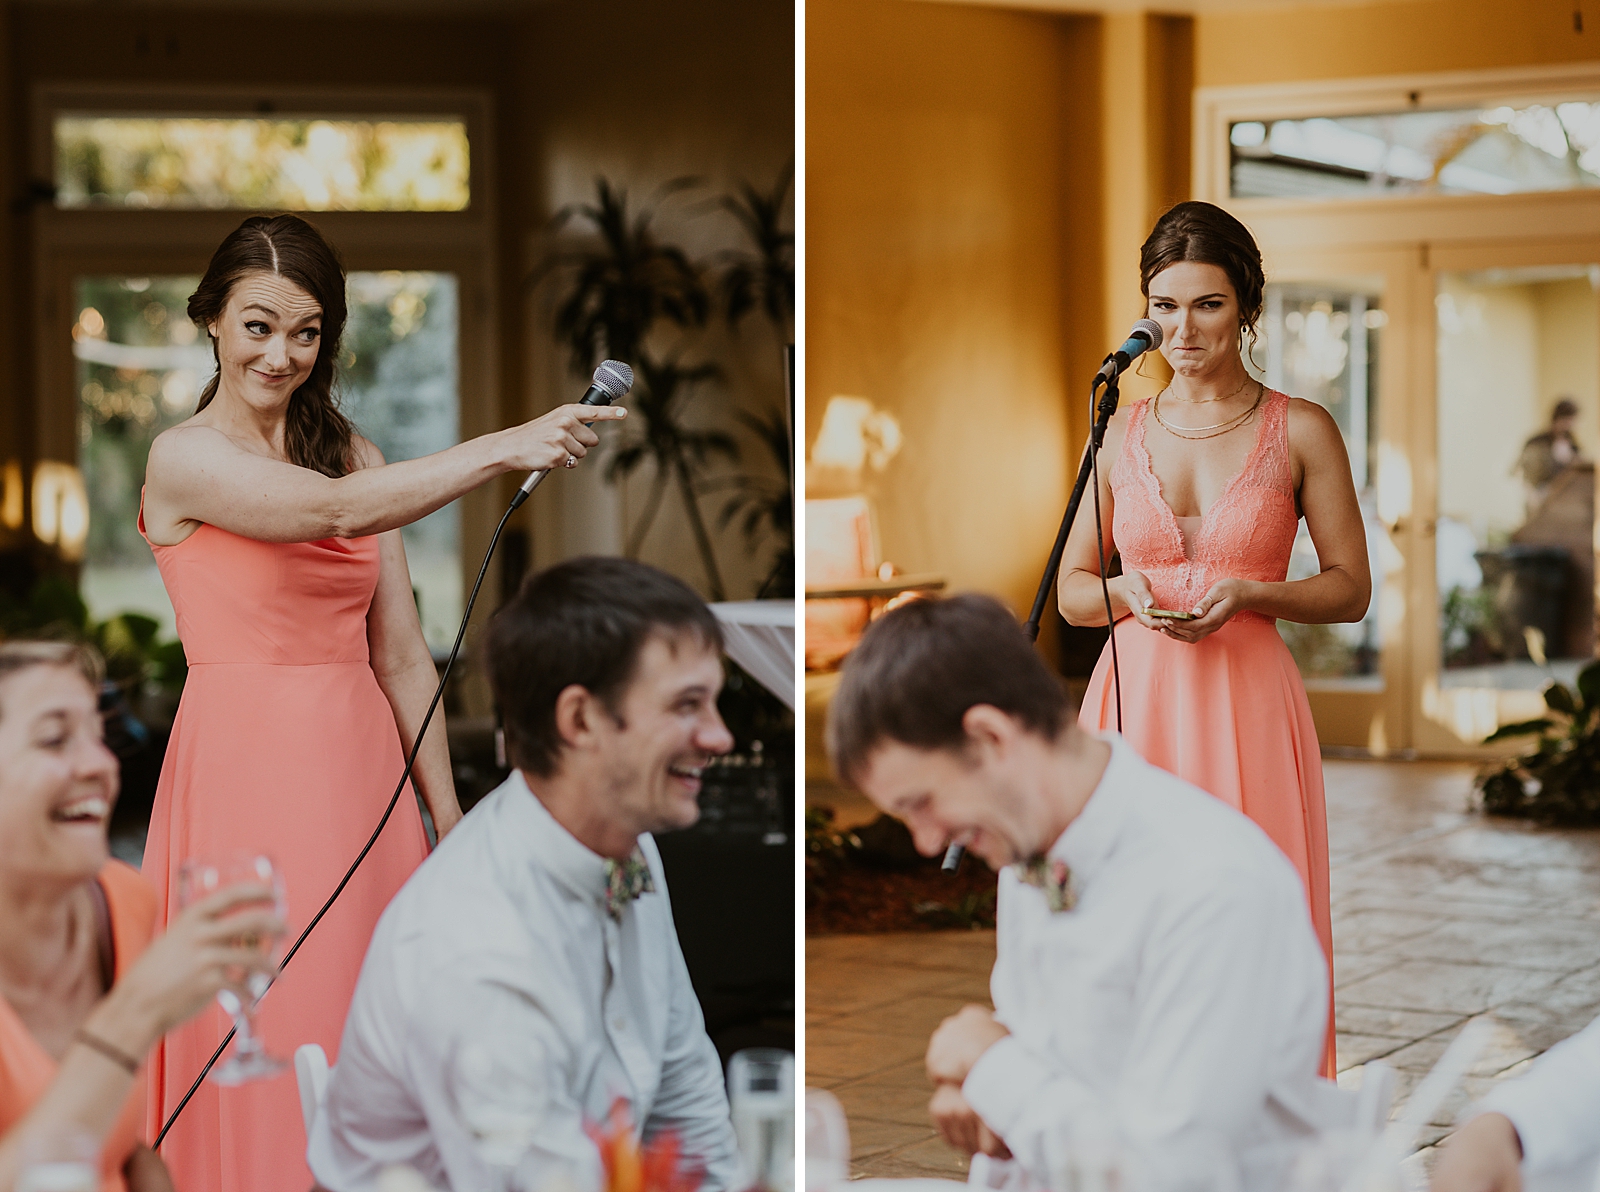 Bridesmaids giving speeches at Wedding Reception with laughter